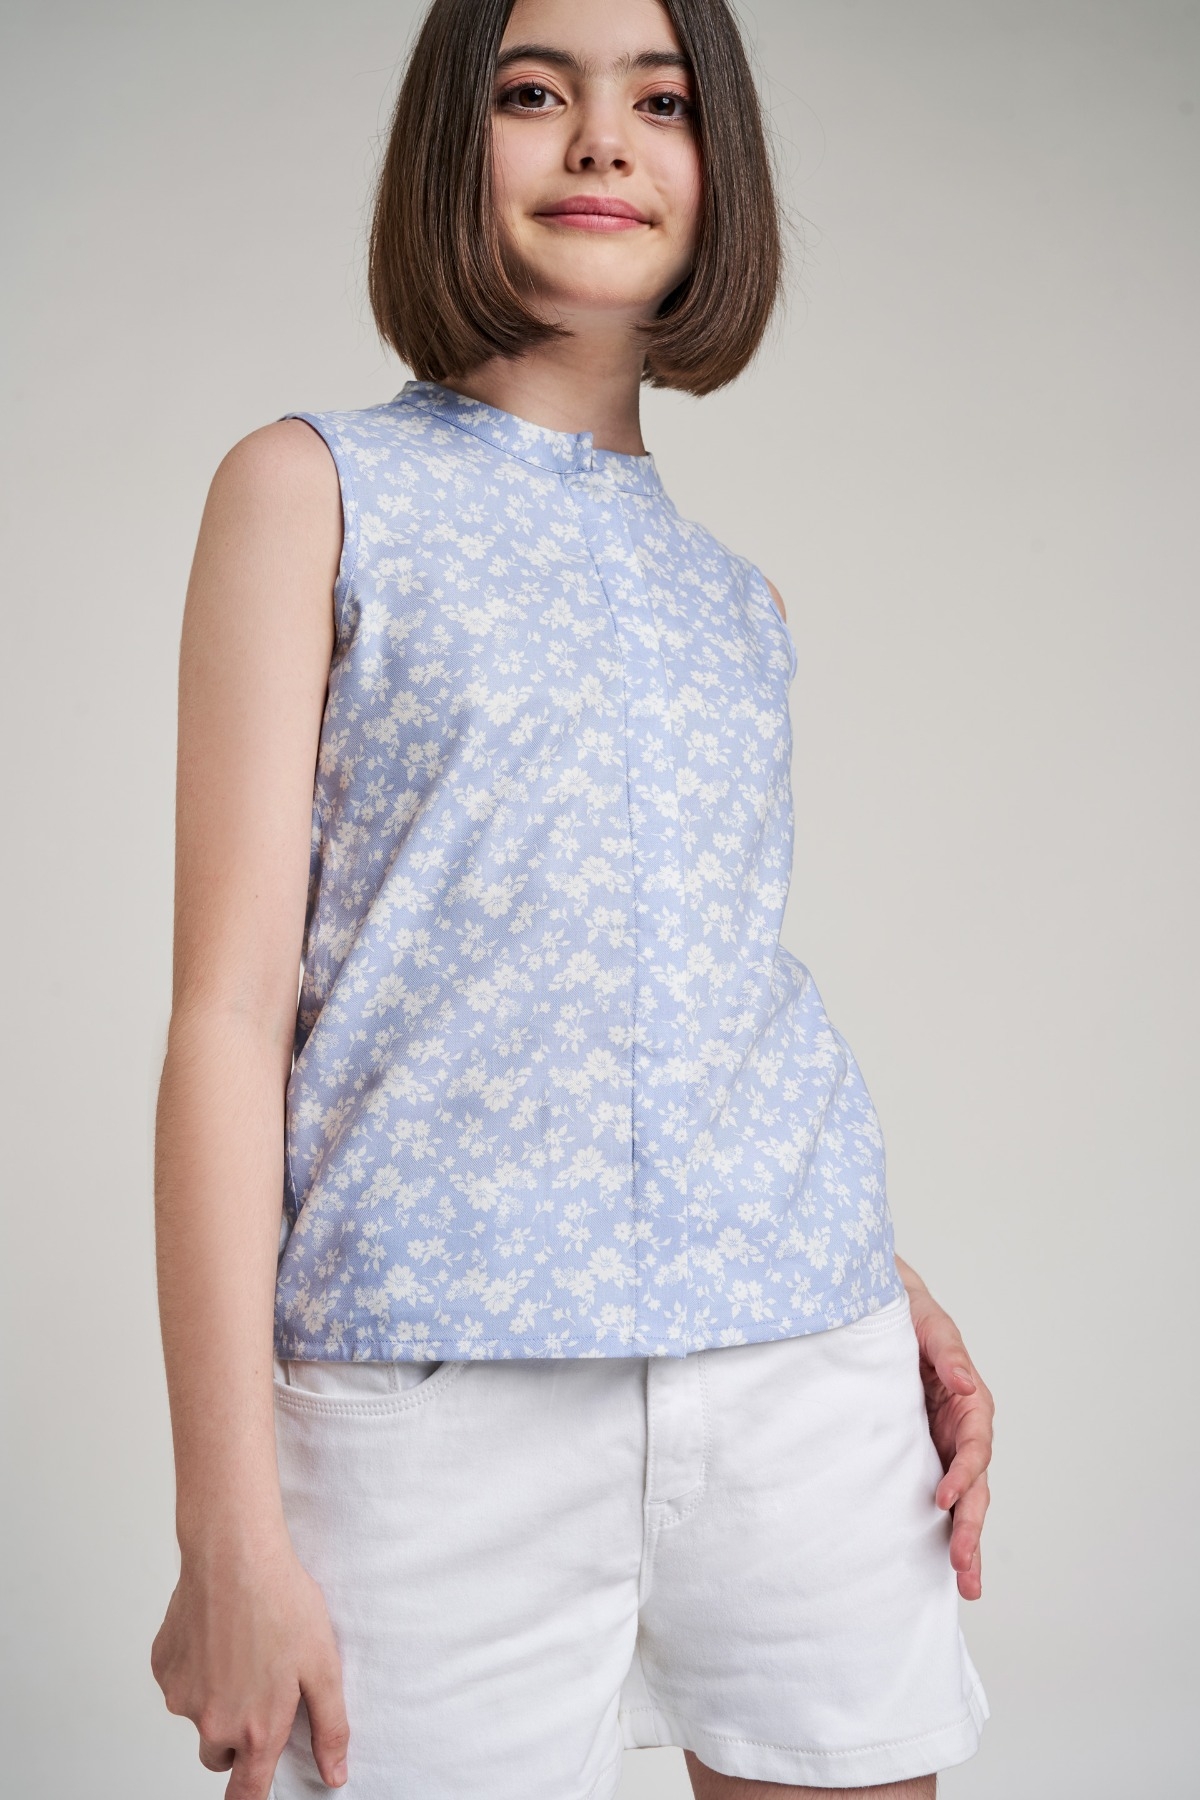 AND | Powder Blue Floral Printed Shift Top